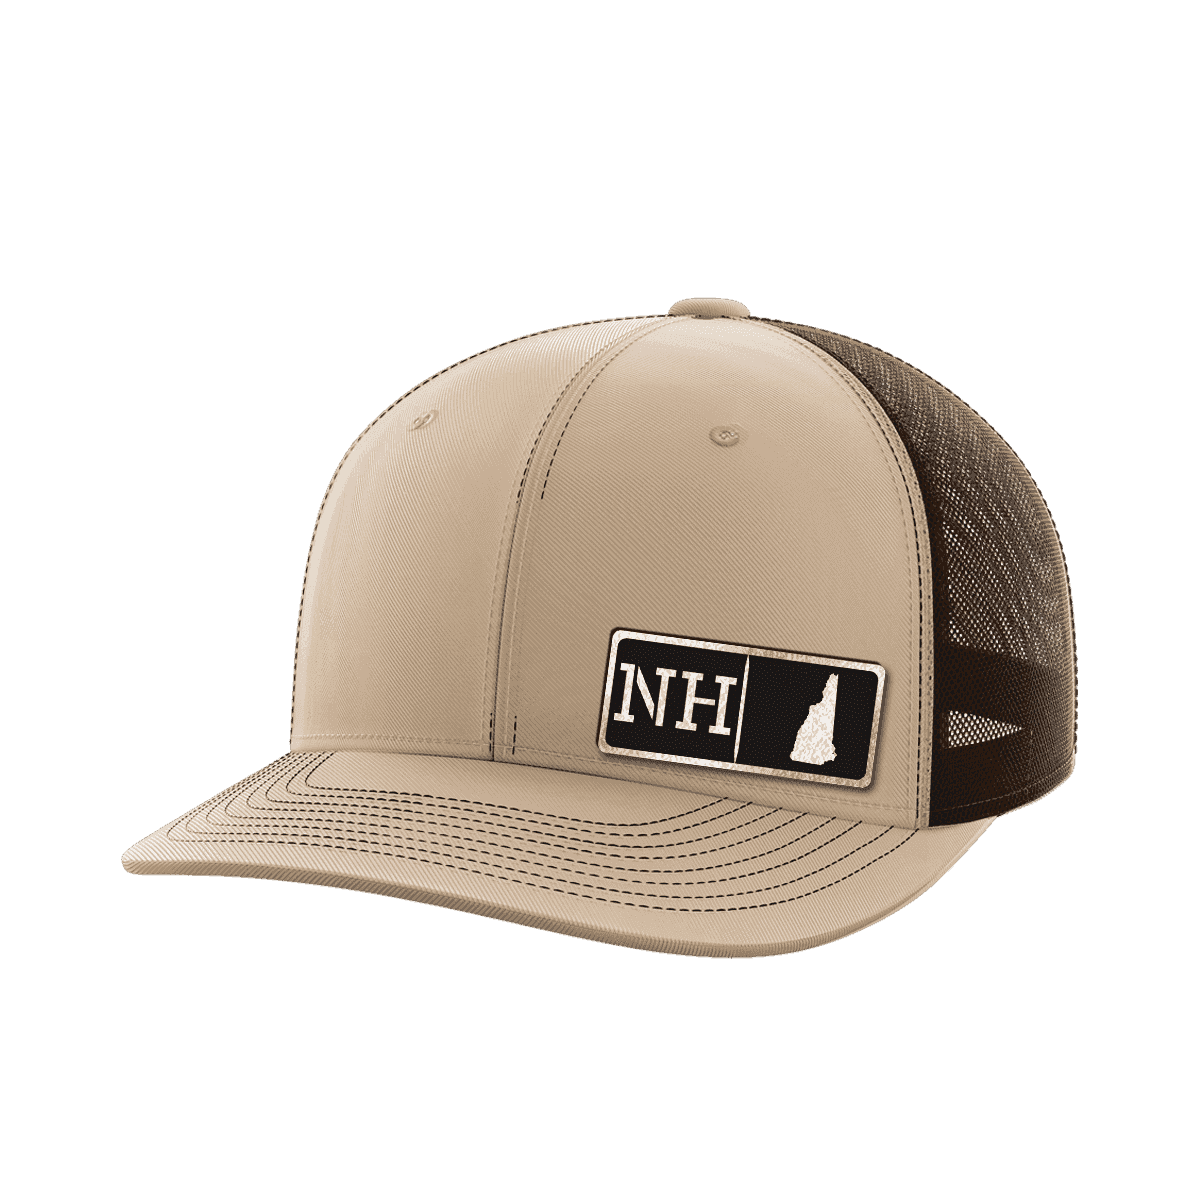 Thumbnail for New Hampshire Homegrown Hats - Greater Half